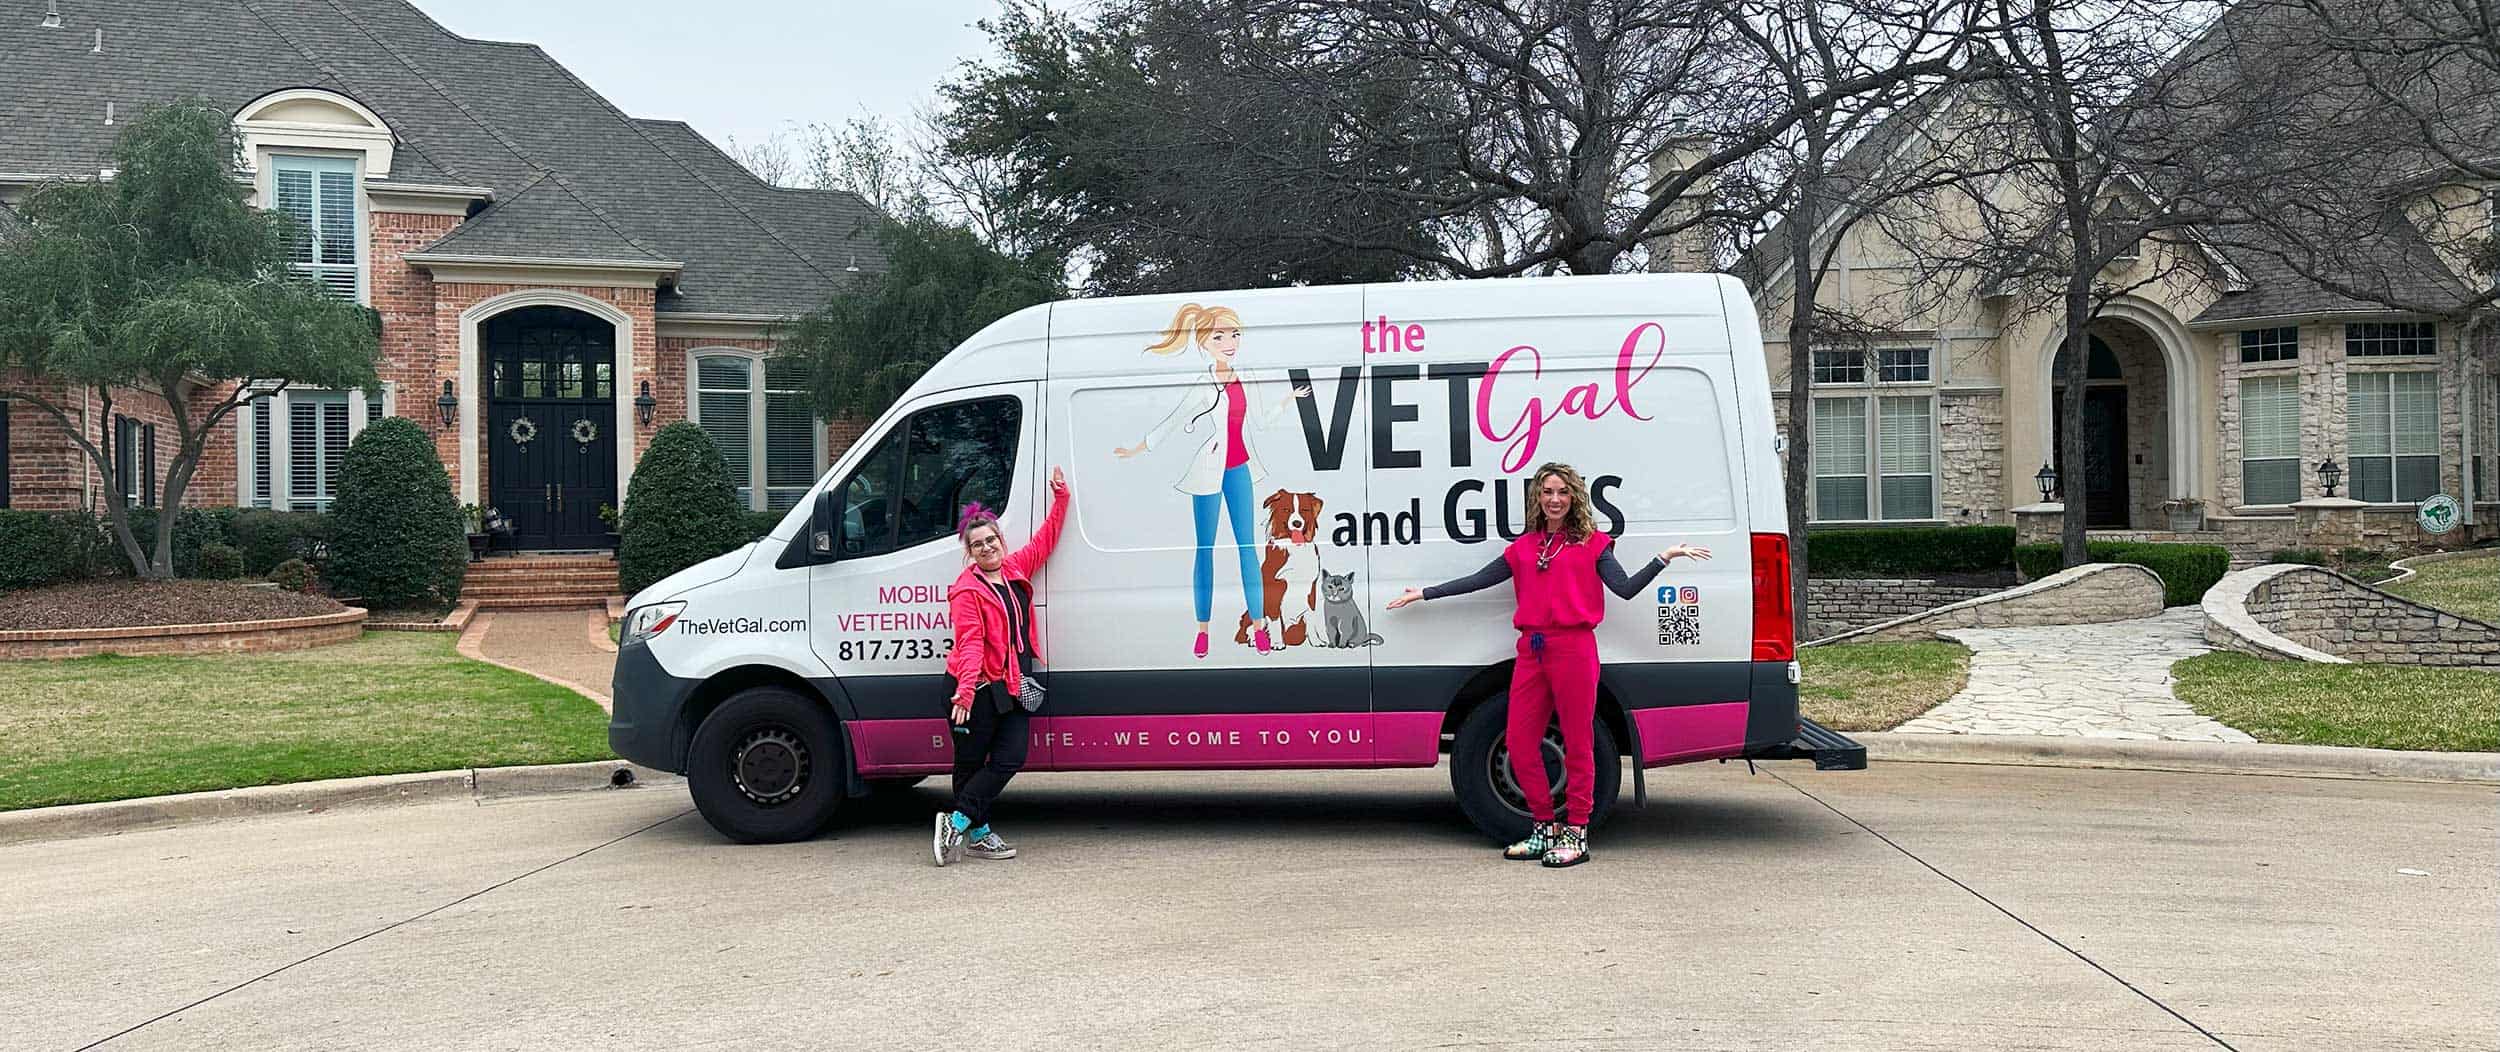 Our veterinary experts in front of our van